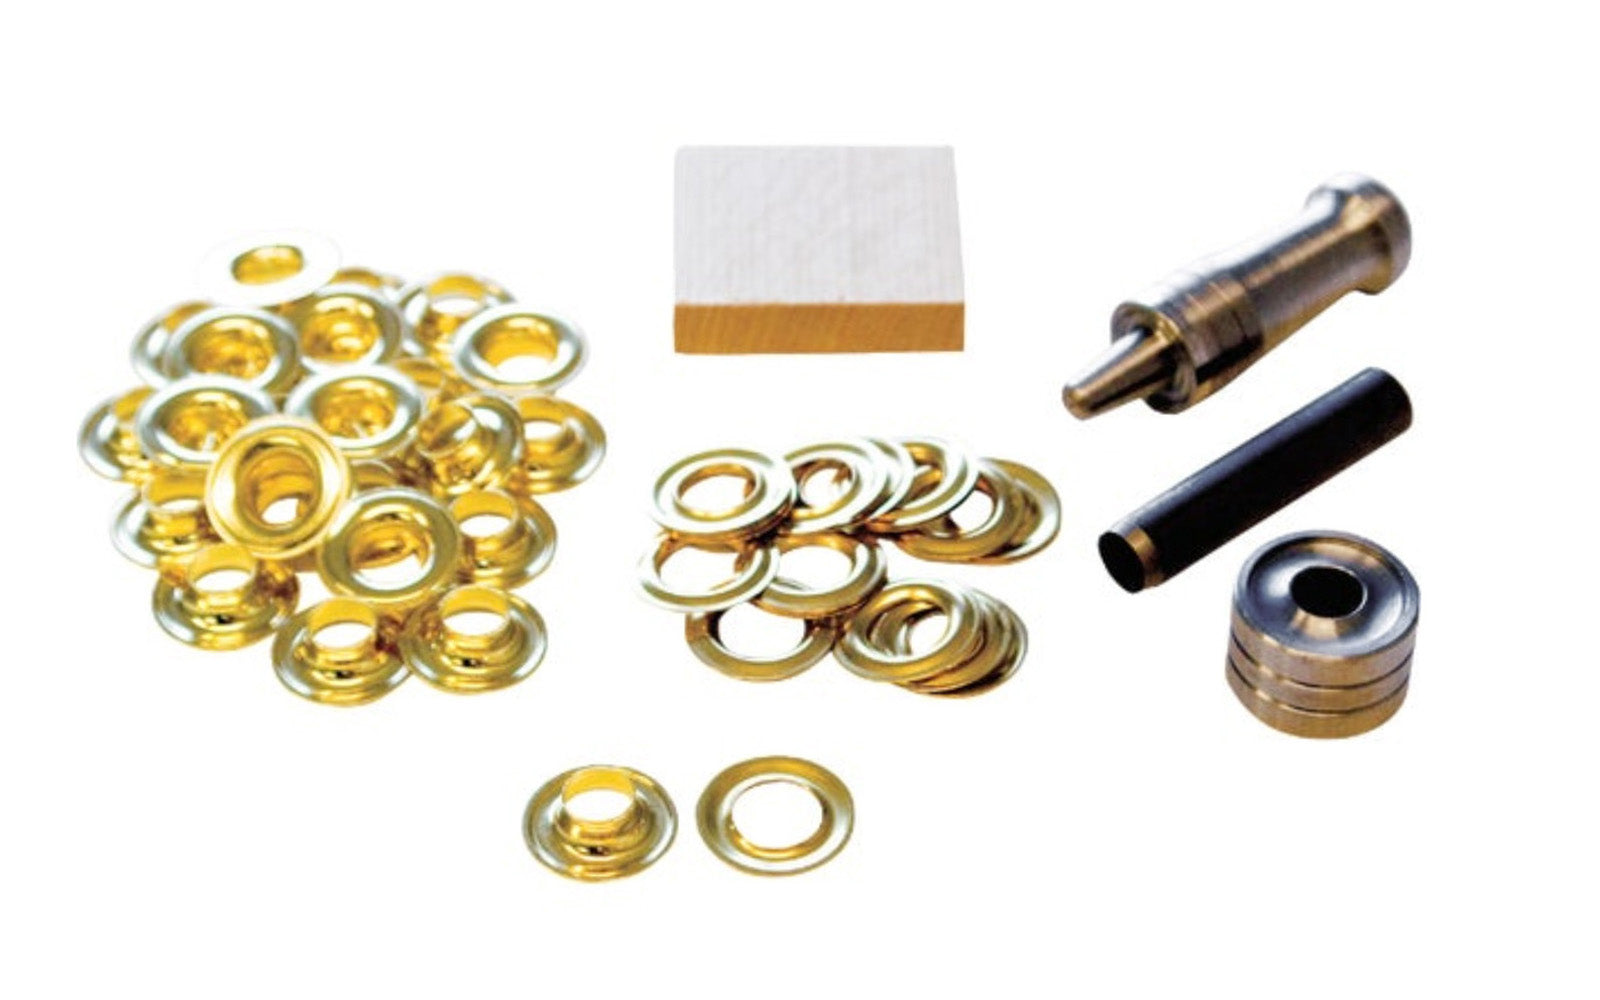 Lord & Hodge 3/8" Brass Grommet Kit for replacement or repairs in canvas or plastic. Instructions included. Tools with kit: Cutting block, hole cutter, inserting punch & die. Great for vinyl & canvas, tents, sails, covers for boats, trailers, pools, flags & banners, etc. 3/8" ID grommets. Model 1073A-2. Made in USA.